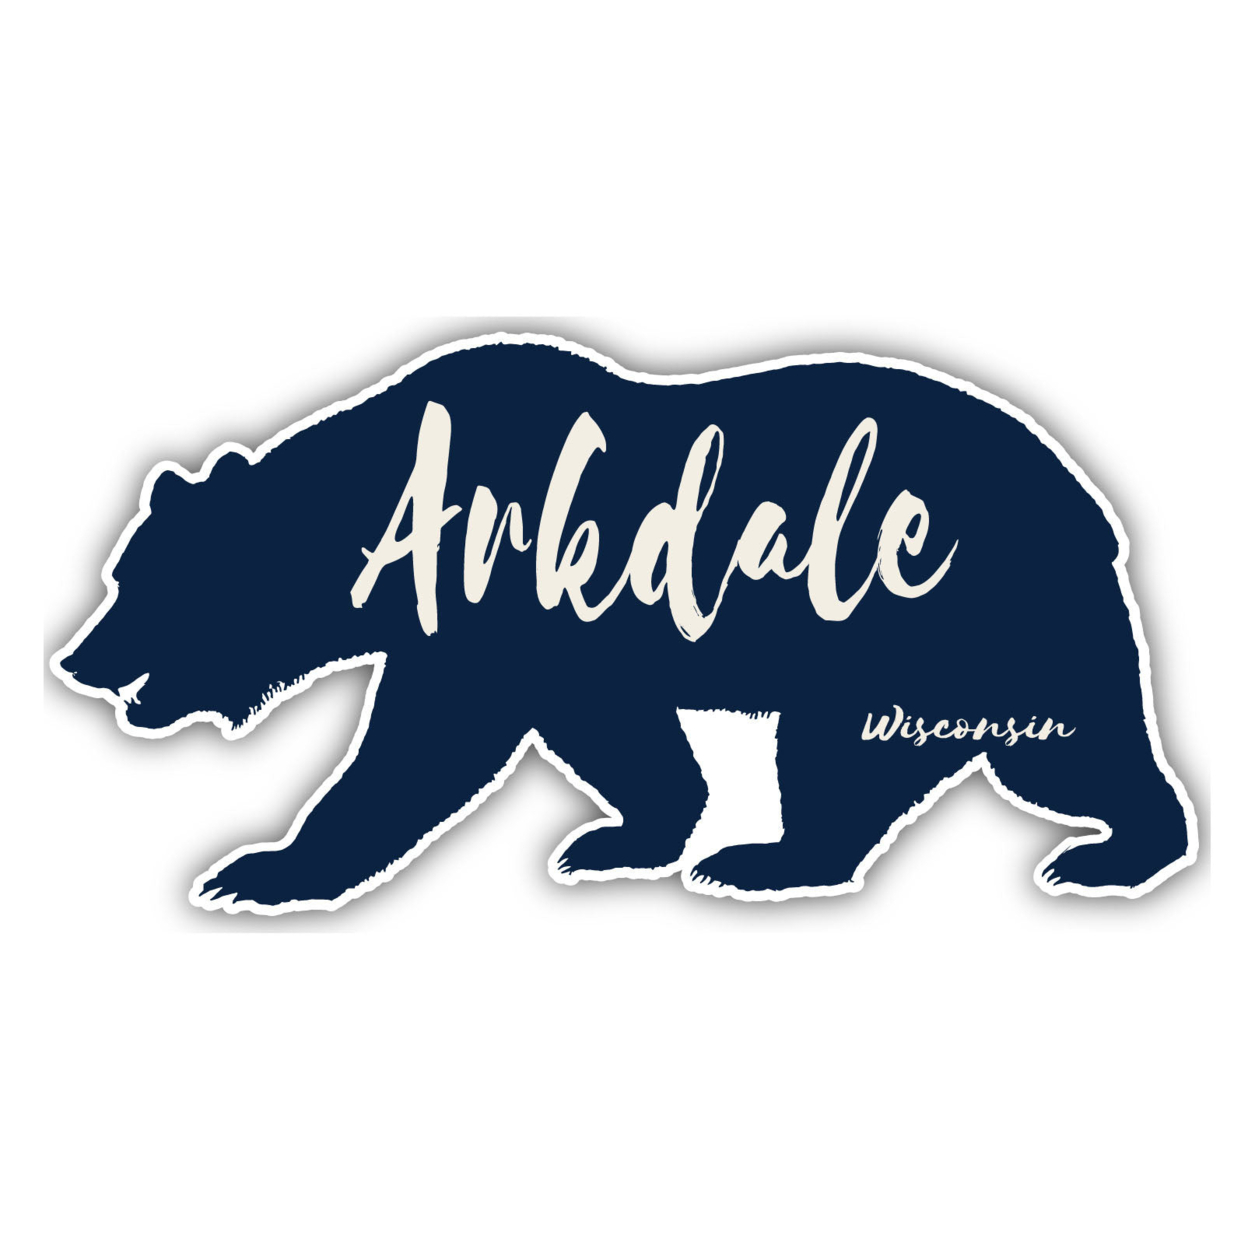 Arkdale Wisconsin Souvenir Decorative Stickers (Choose Theme And Size) - Single Unit, 8-Inch, Tent